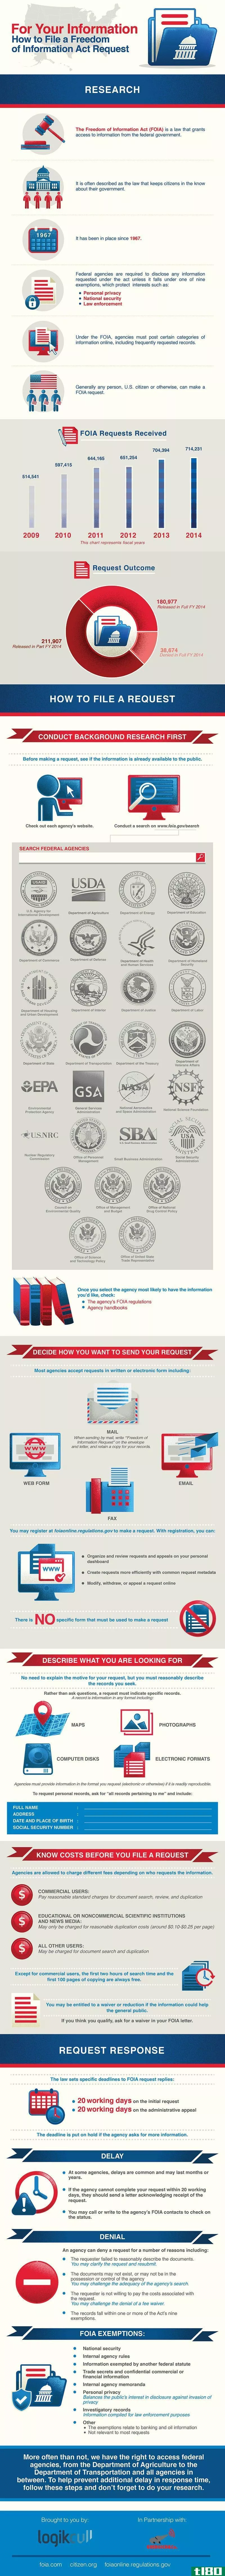 Illustration for article titled This Graphic Explains How to File a Freedom of Information Act Request